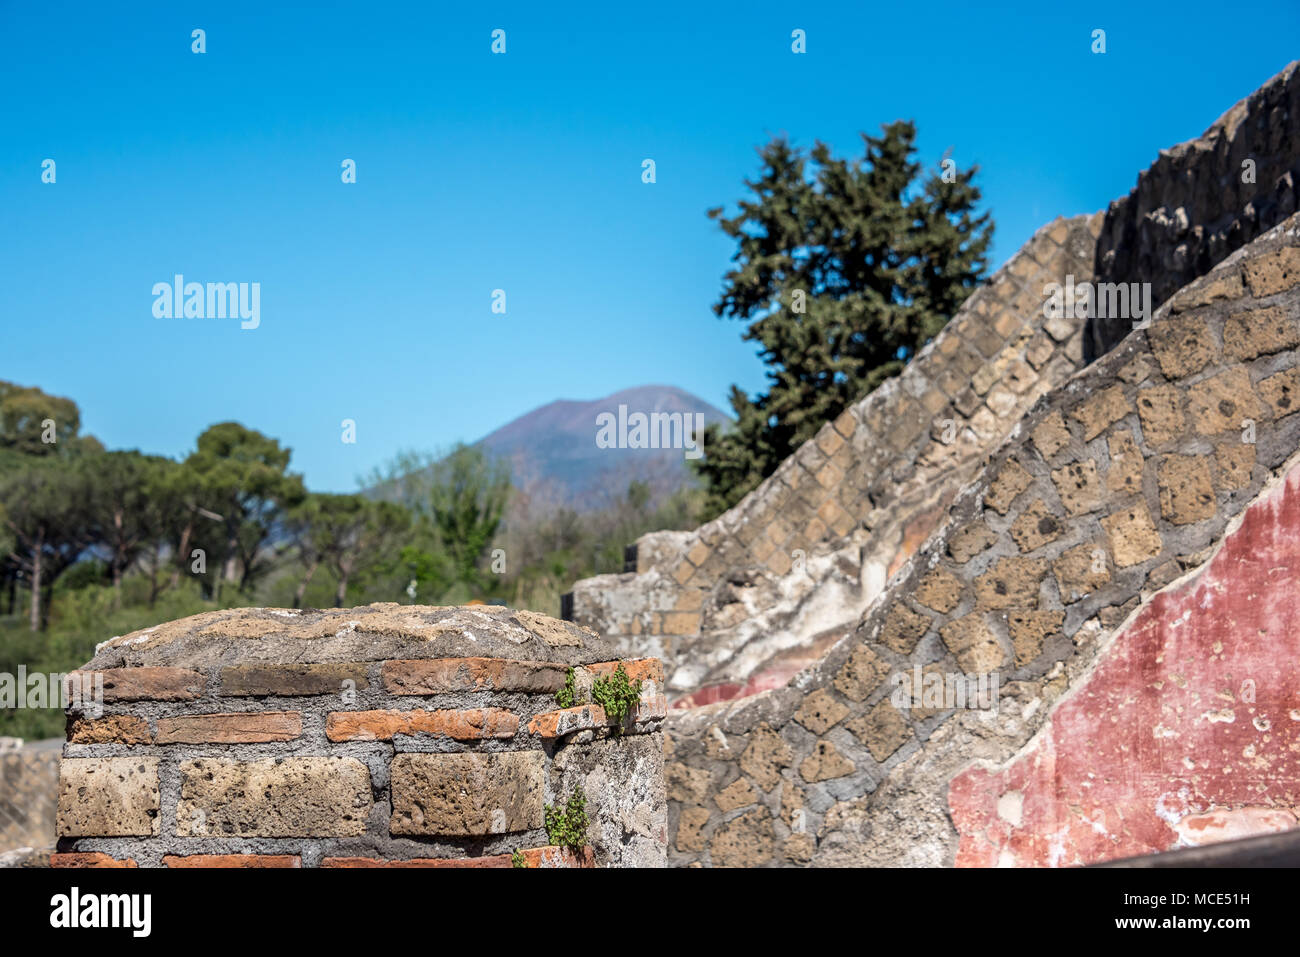 Layers of history in exposed brick walls and remaining fresco at Pompeii with Mt. Vesuvius volcano in background, Pompeii Archaeological Park, Italy. Stock Photo